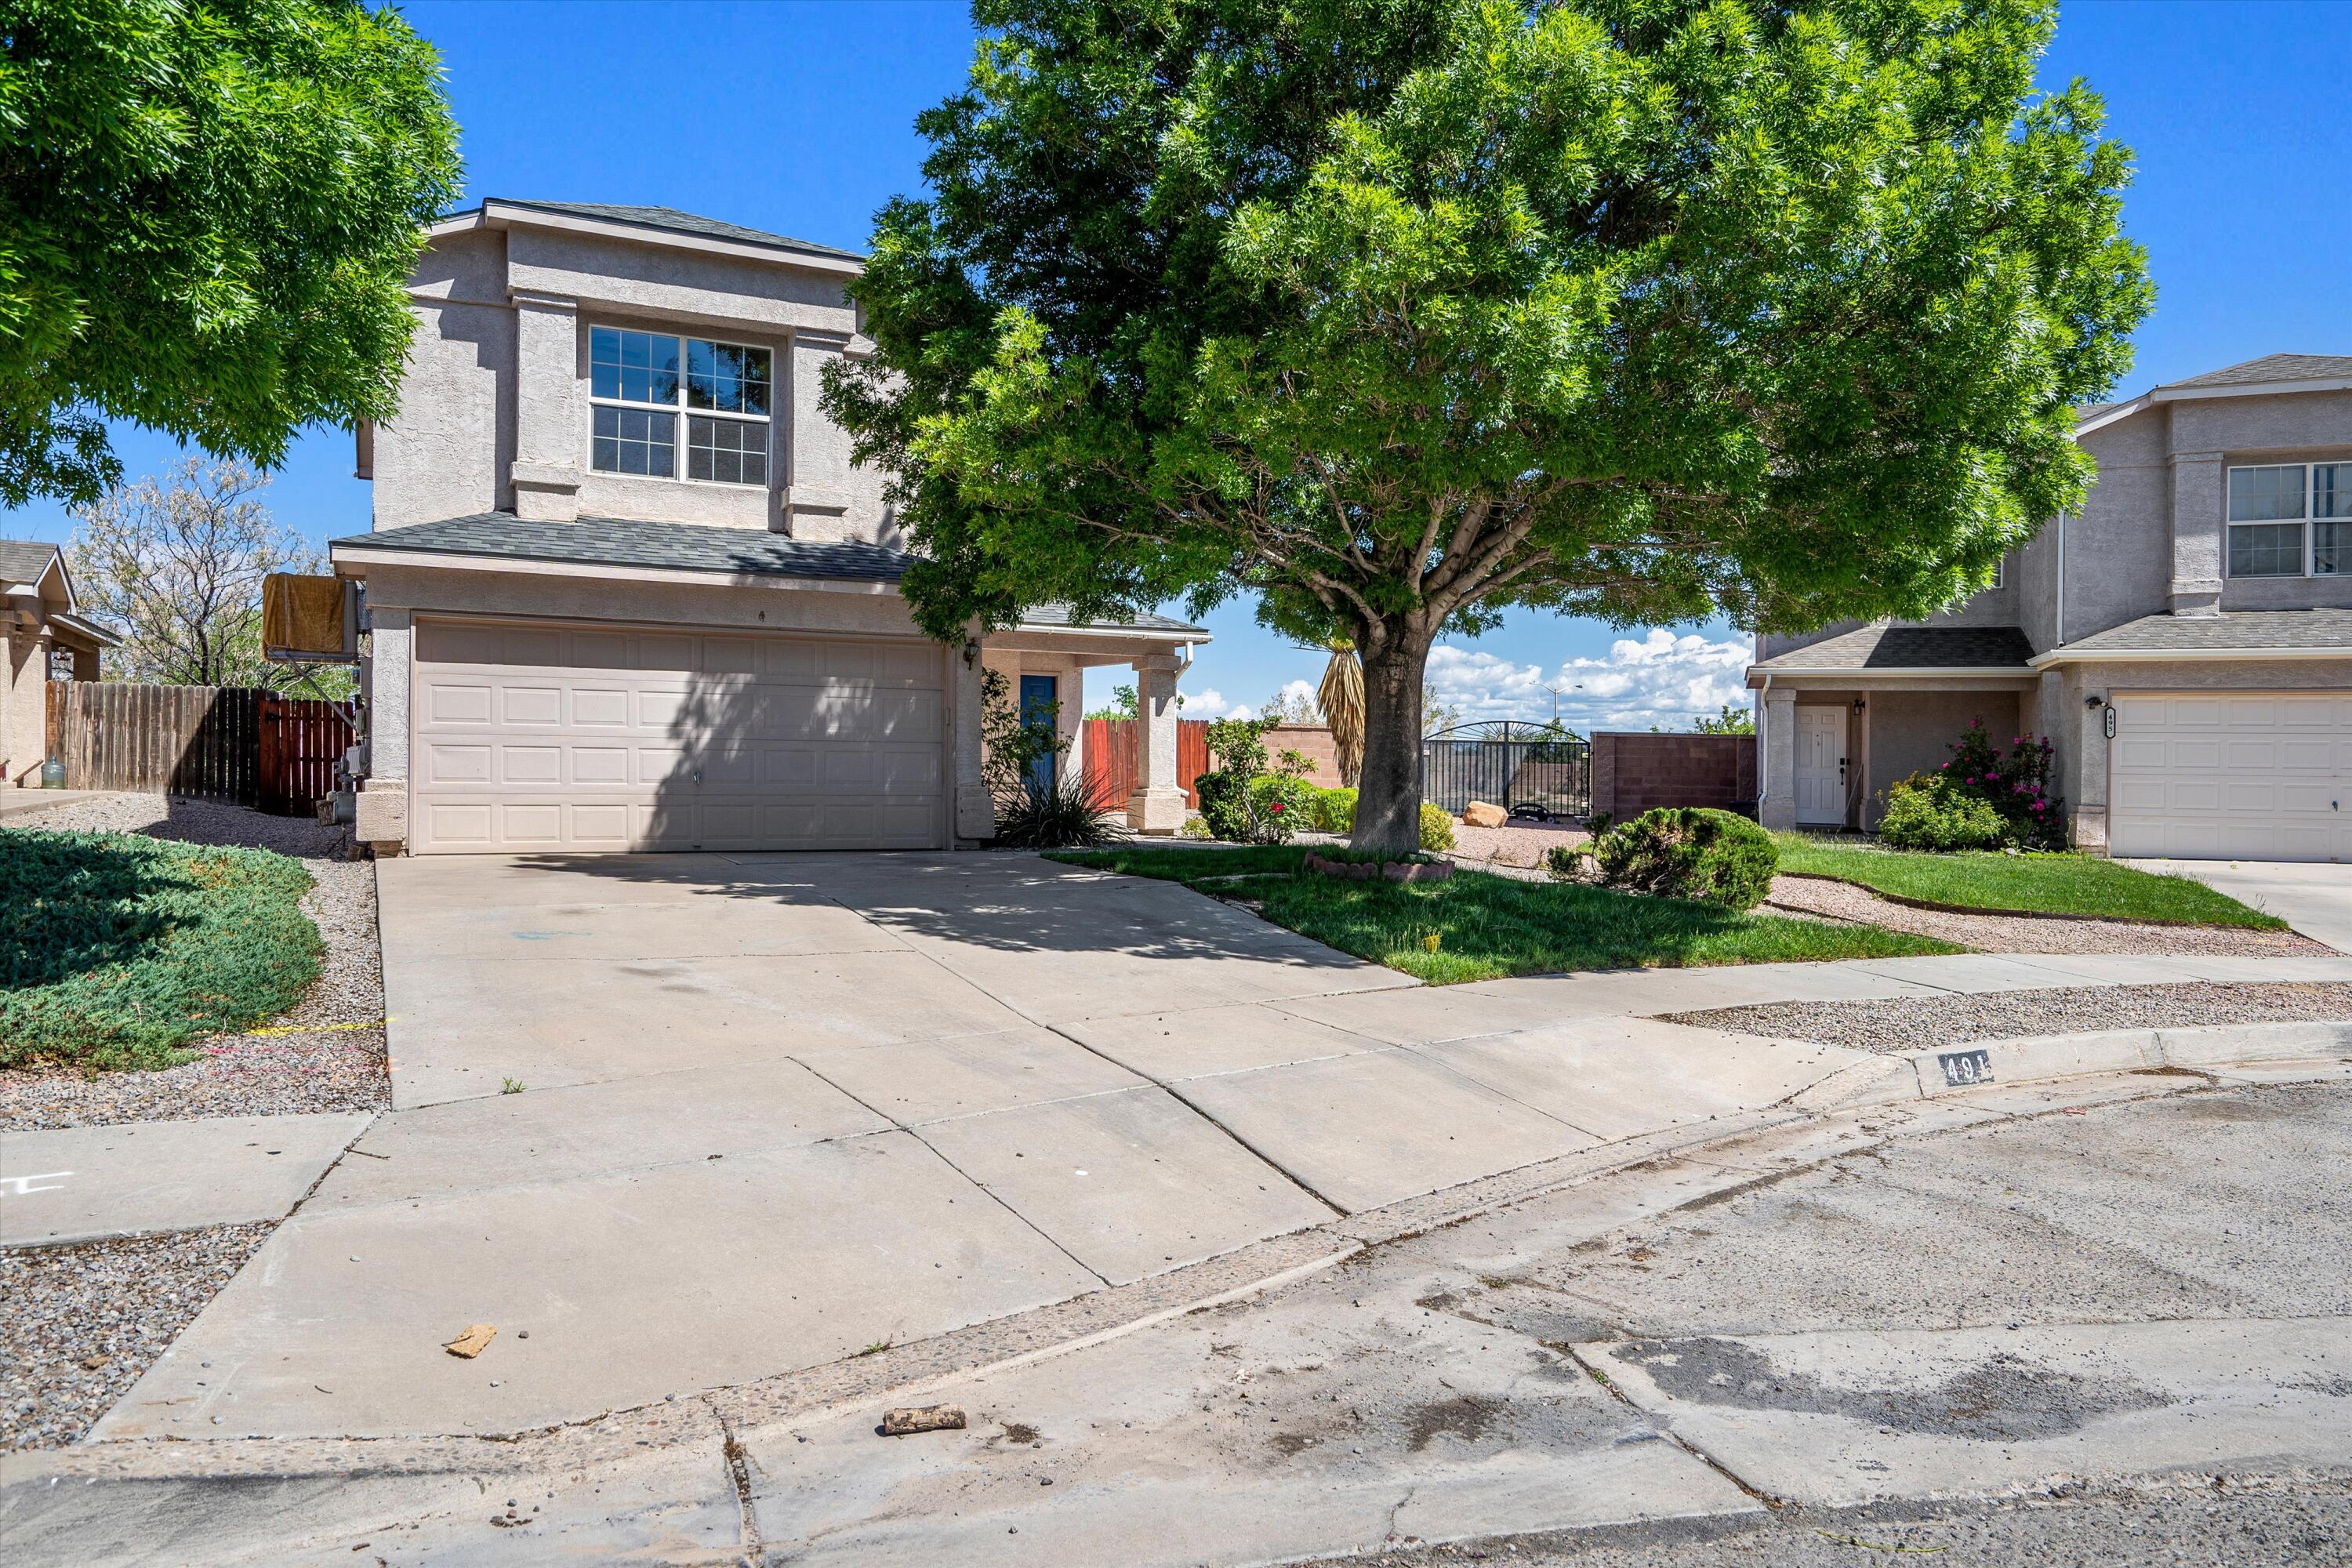 Must see! This 3 bed 2.5 bath home, features a New roof, fresh paint and New carpet.  The location is great, oversized lot and backs up to a beautiful park. It also has back yard access if need be. Don't wait this wont last long.